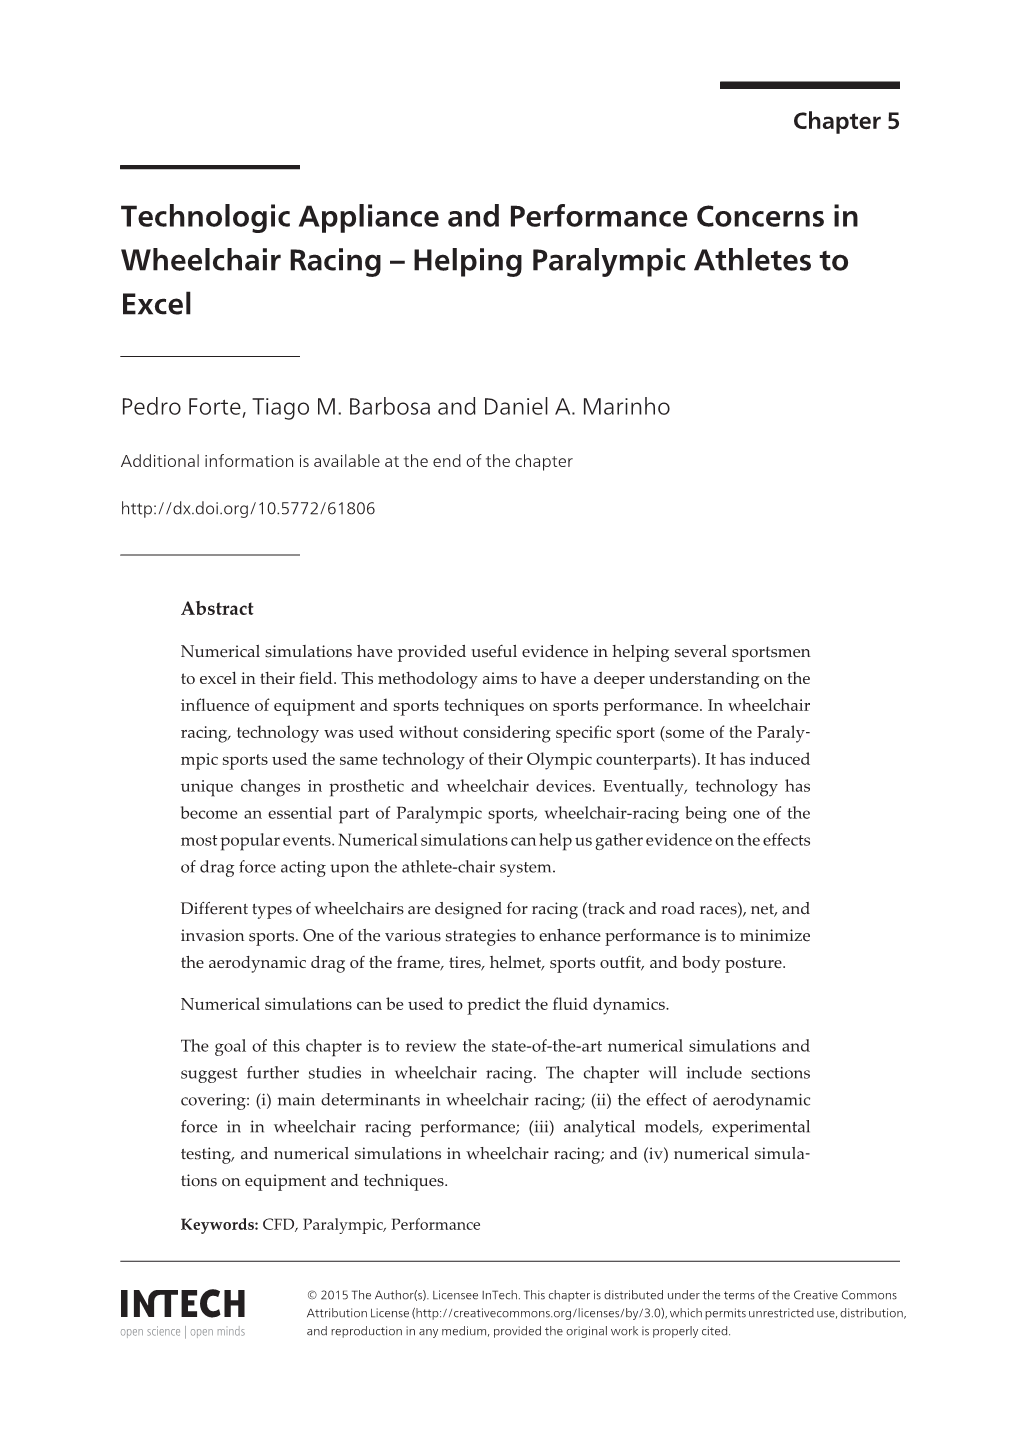 Technologic Appliance and Performance Concerns in Wheelchair Racing – Helping Paralympic Athletes to Excel